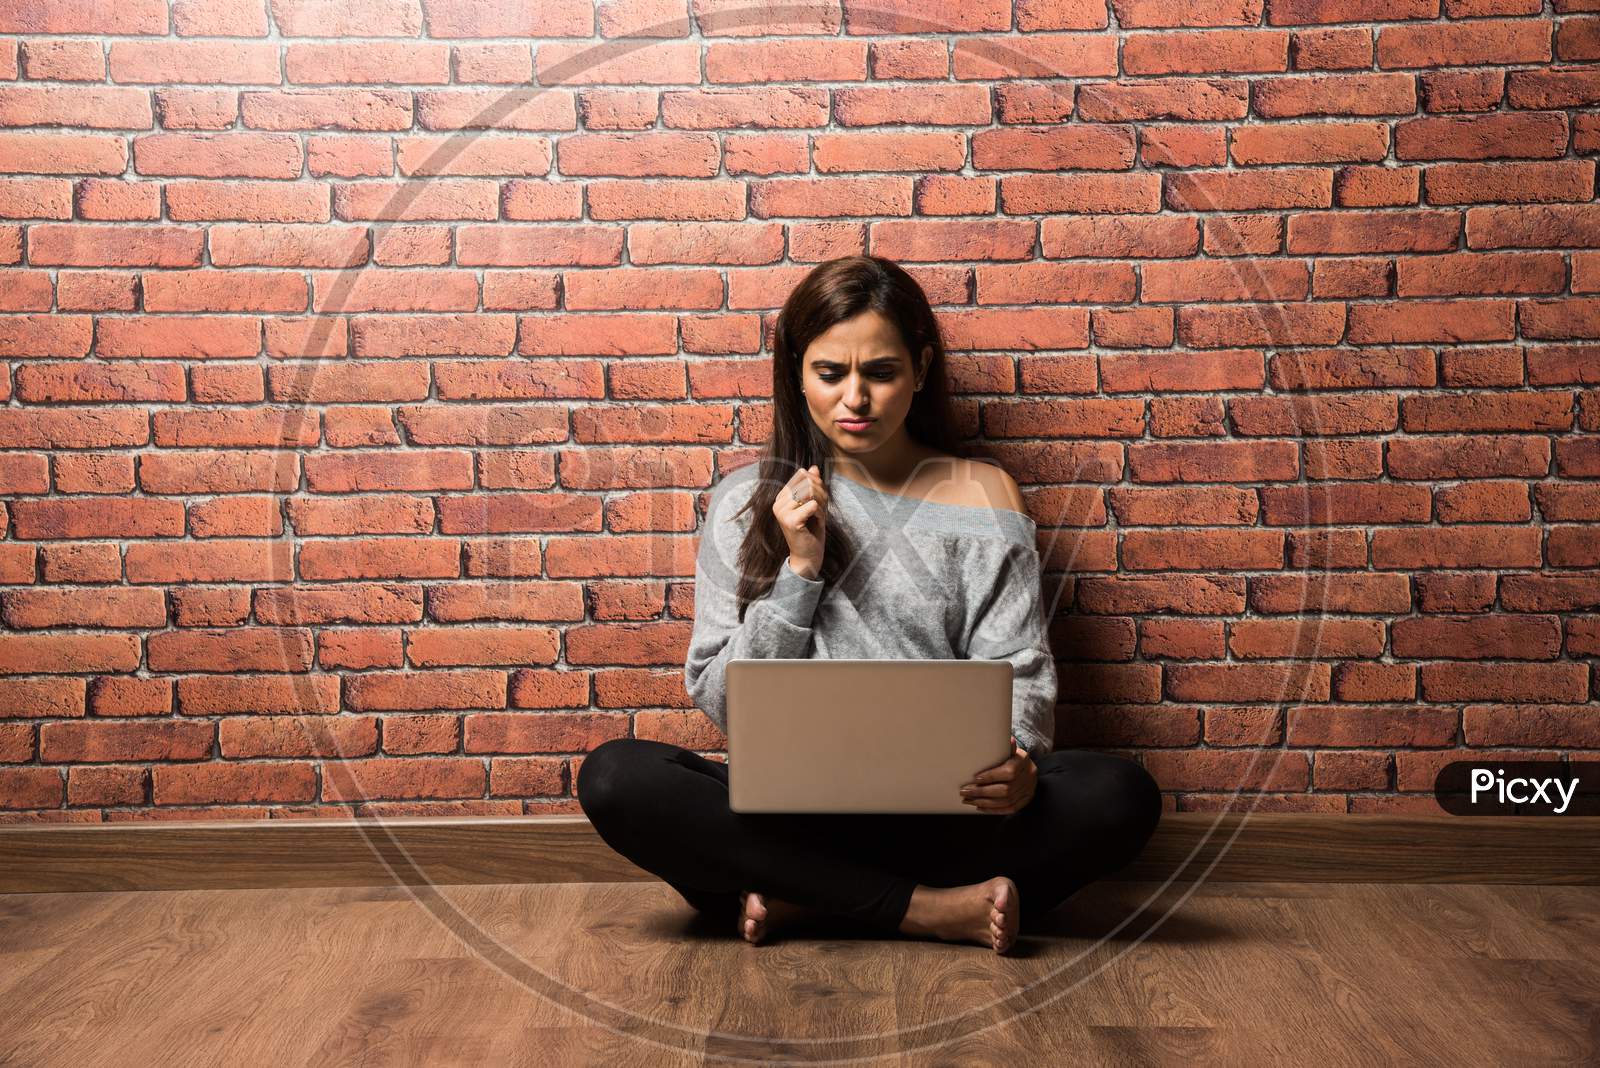 Indian girl with laptop sitting over wooden floor against red brick wall